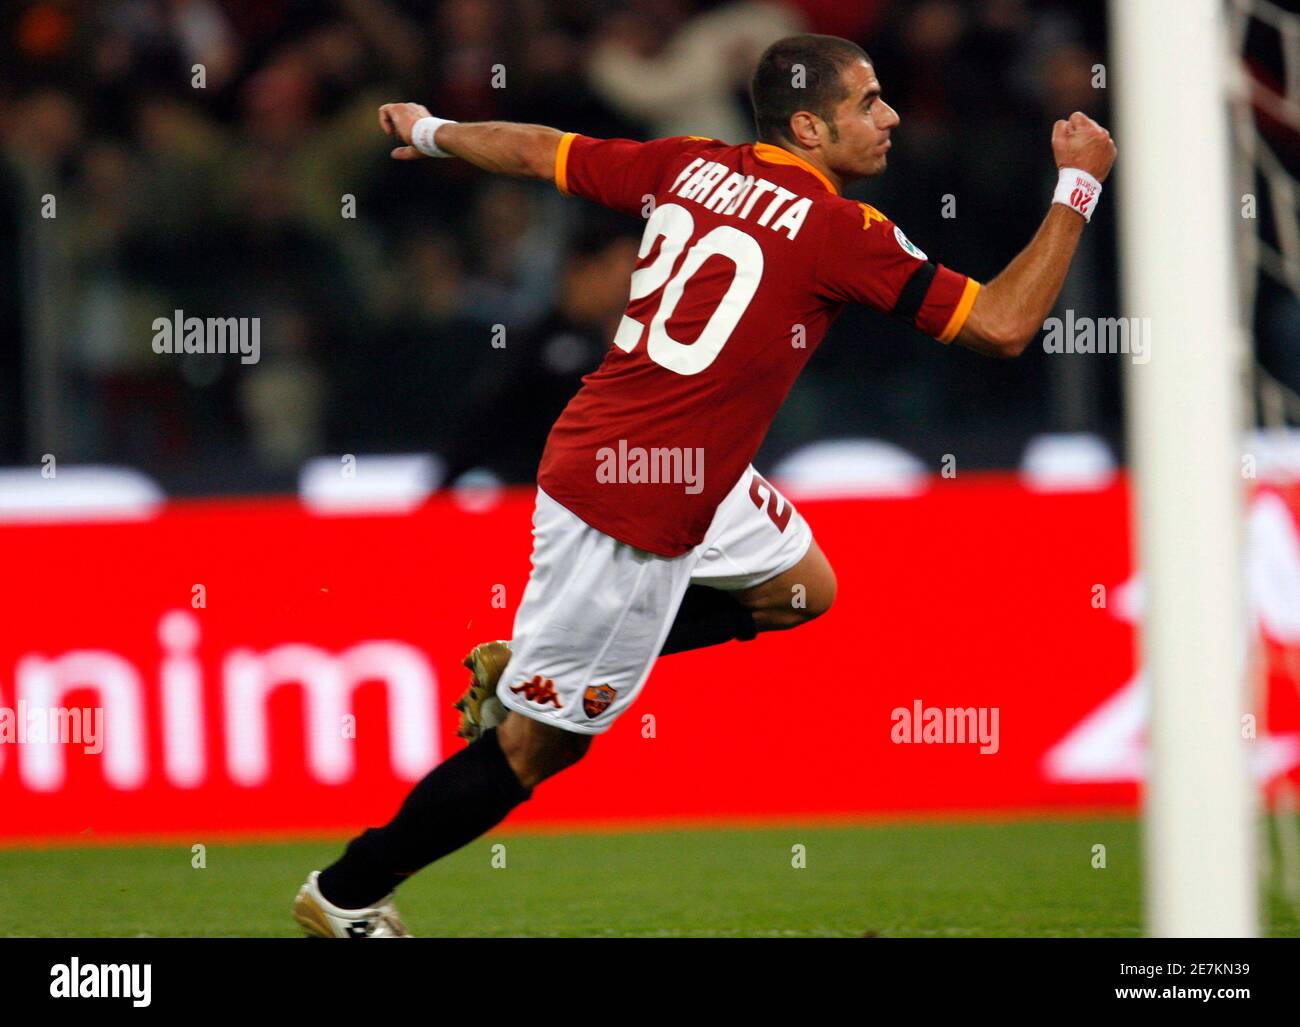 AS Roma's Simone Perrotta celebrates his goal against Lazio during their Italian Serie A soccer derby match at the Olympic stadium in Rome October 31, 2007. REUTERS/Giampiero Sposito      (ITALY) Stock Photo